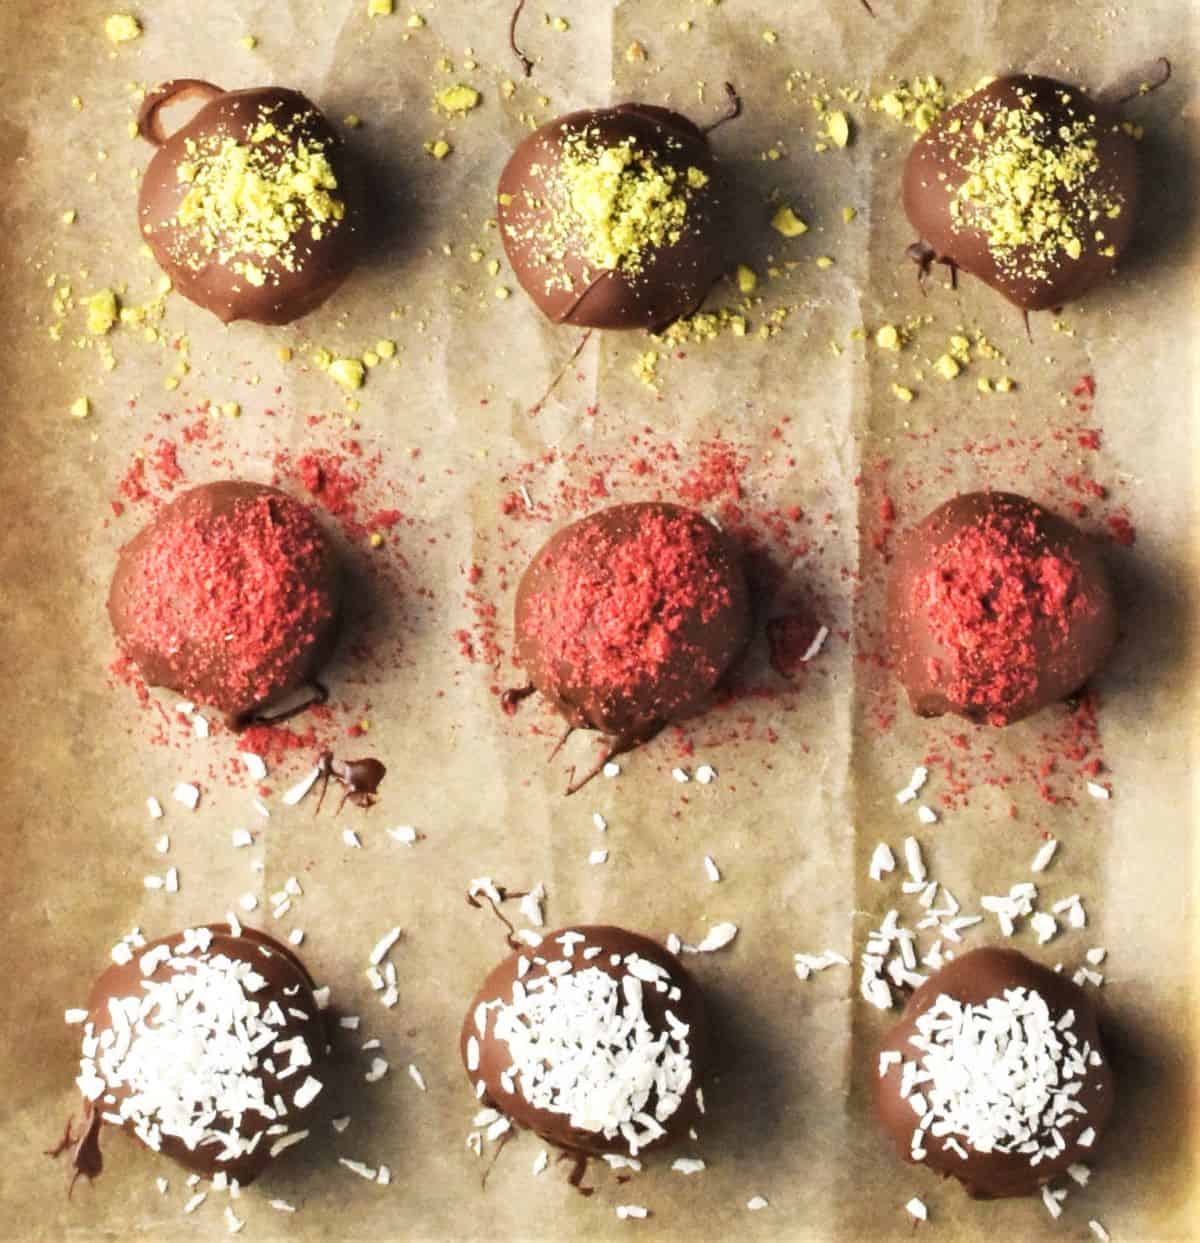 Top down view of 9 Christmas chocolate truffles on parchment.